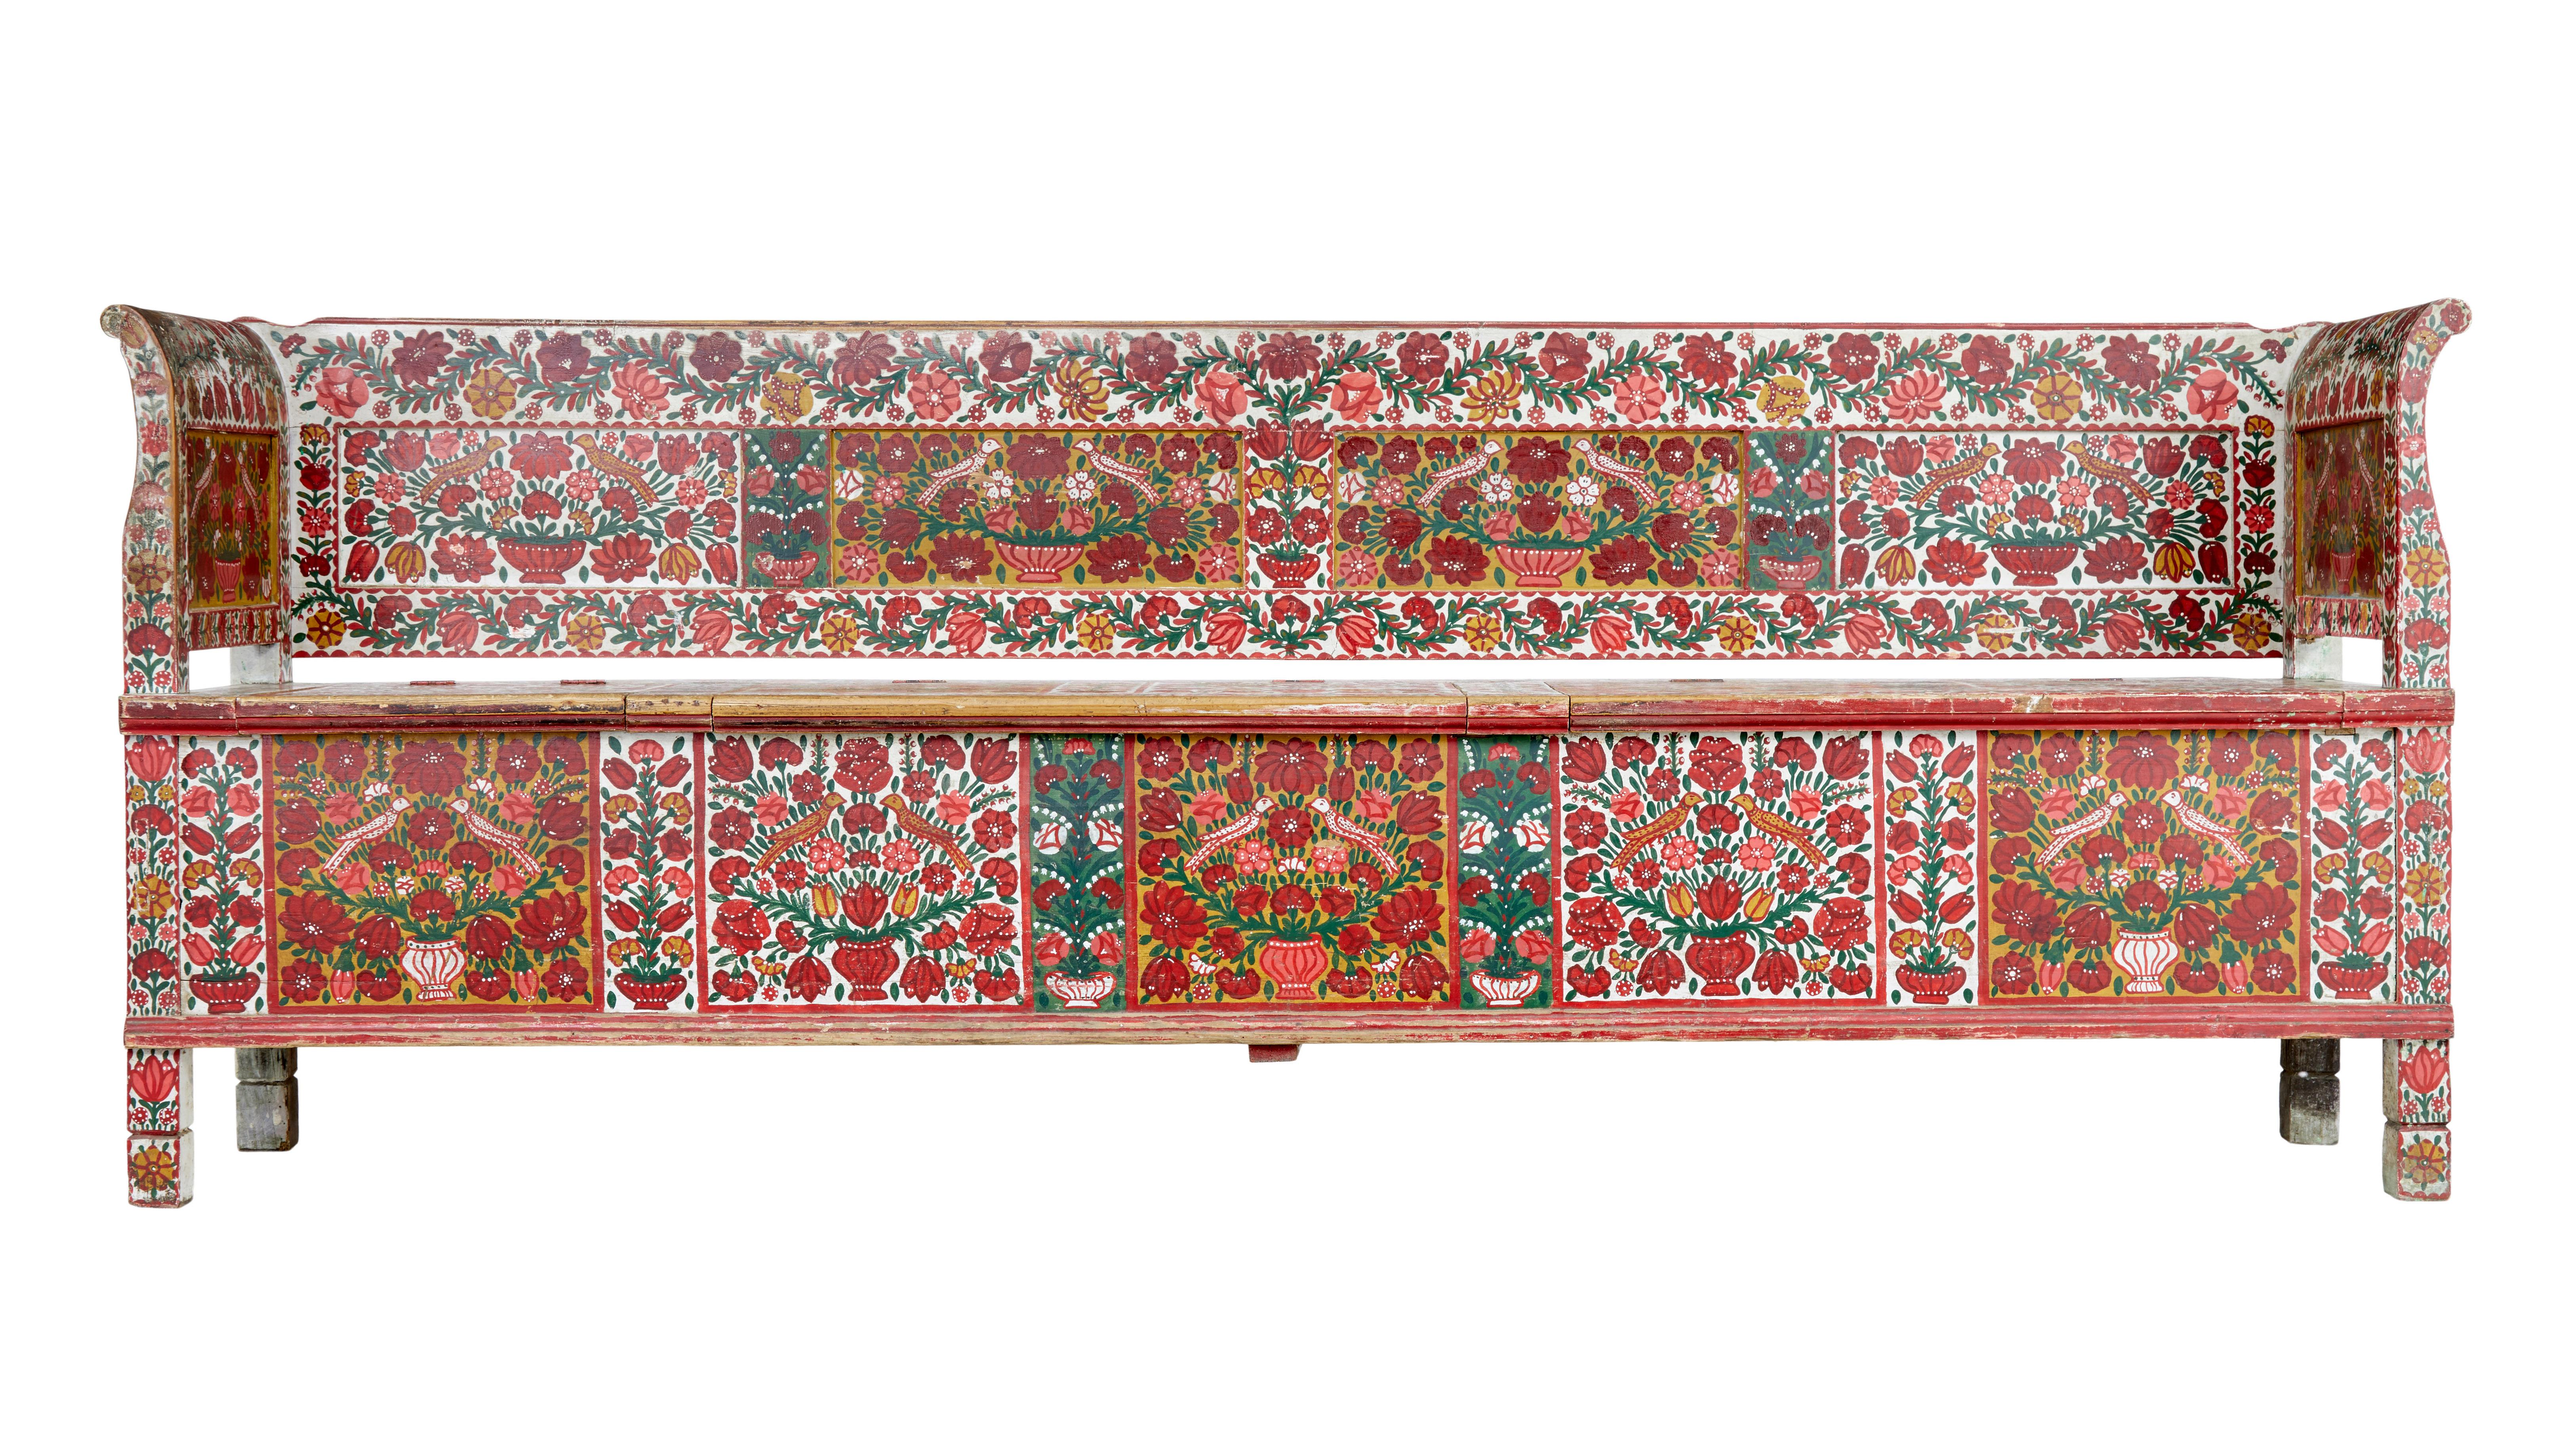 Stunning Swedish pine bench of large proportions circa 1860.

Original hand painted Swedish folk art decoration. Red and orange flowers spraying from an urn with birds.

3 light up panels in the seats which open up to reveal ample storage.

A